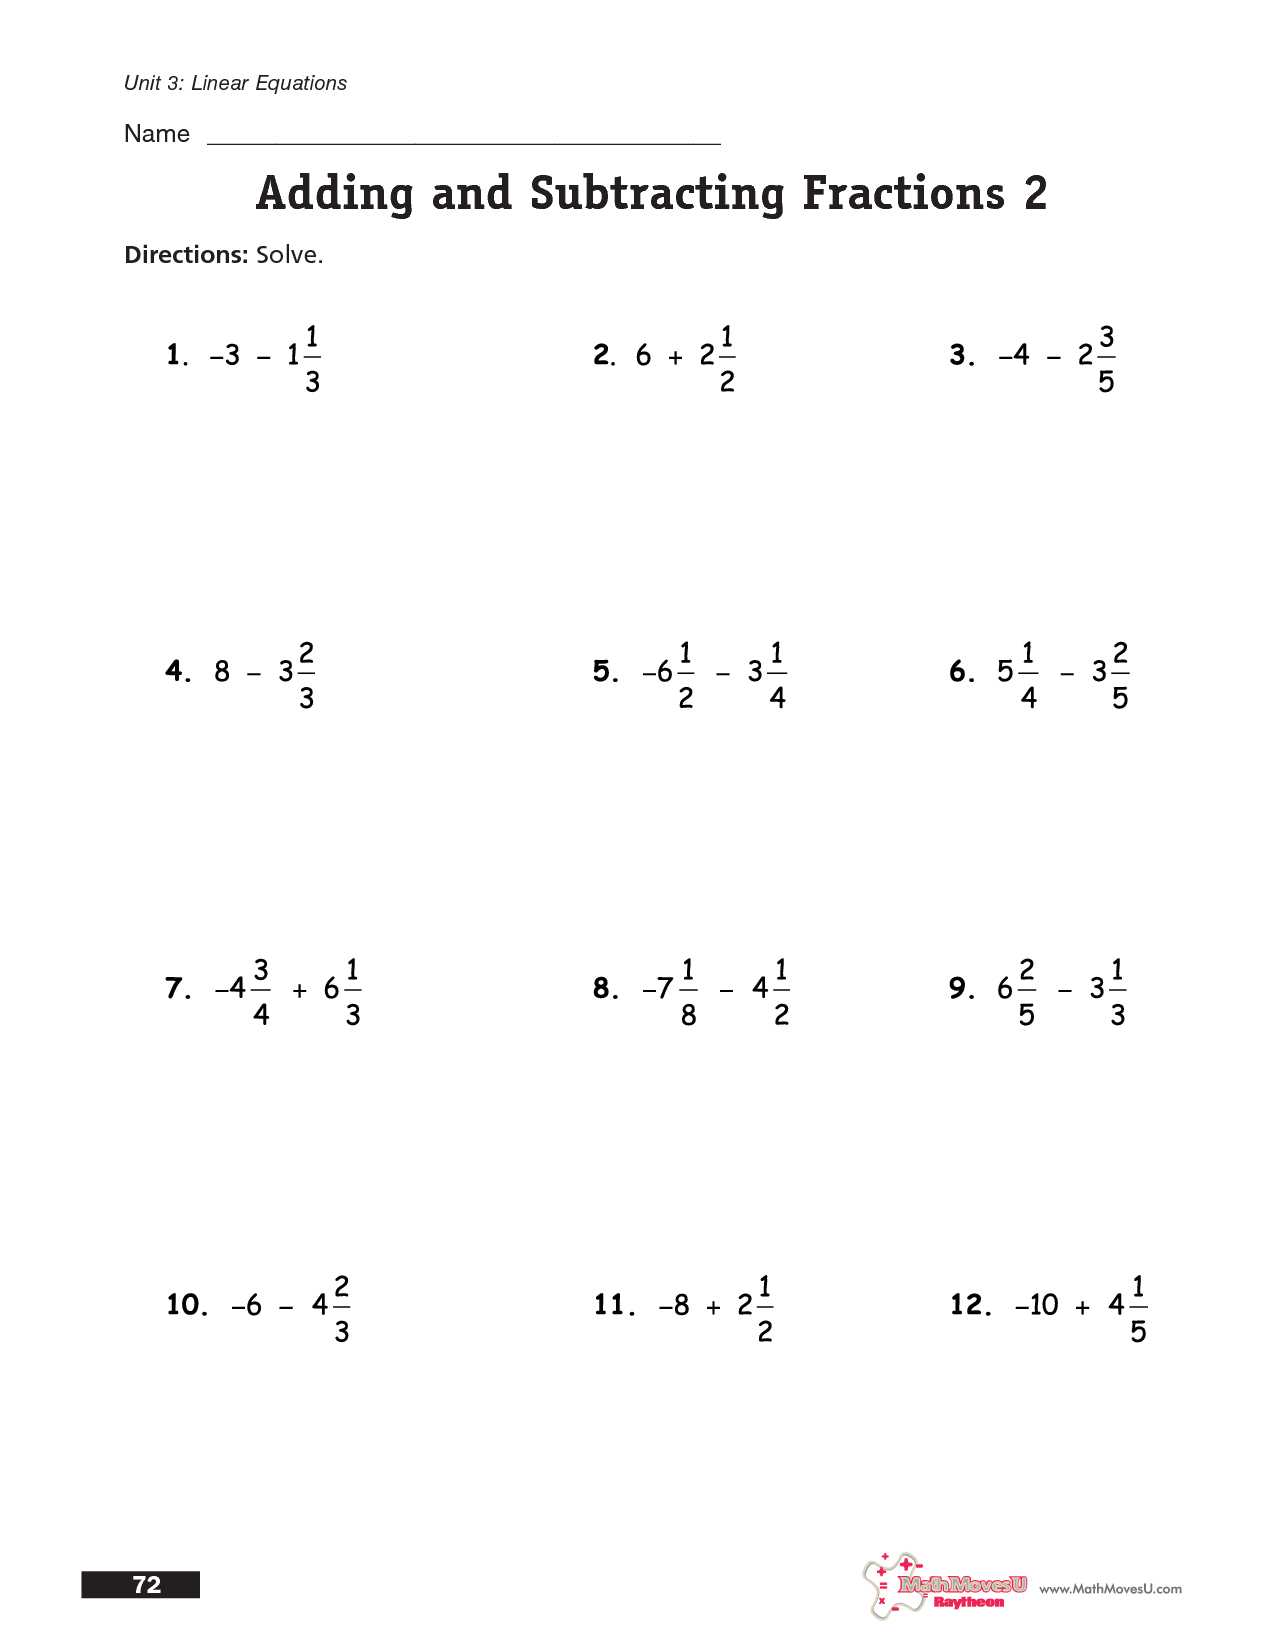 Solving Addition and Subtraction Equations Worksheets Answers as Well as Grade 6 Math Fractions Worksheets Luxury Adding and Subtracting